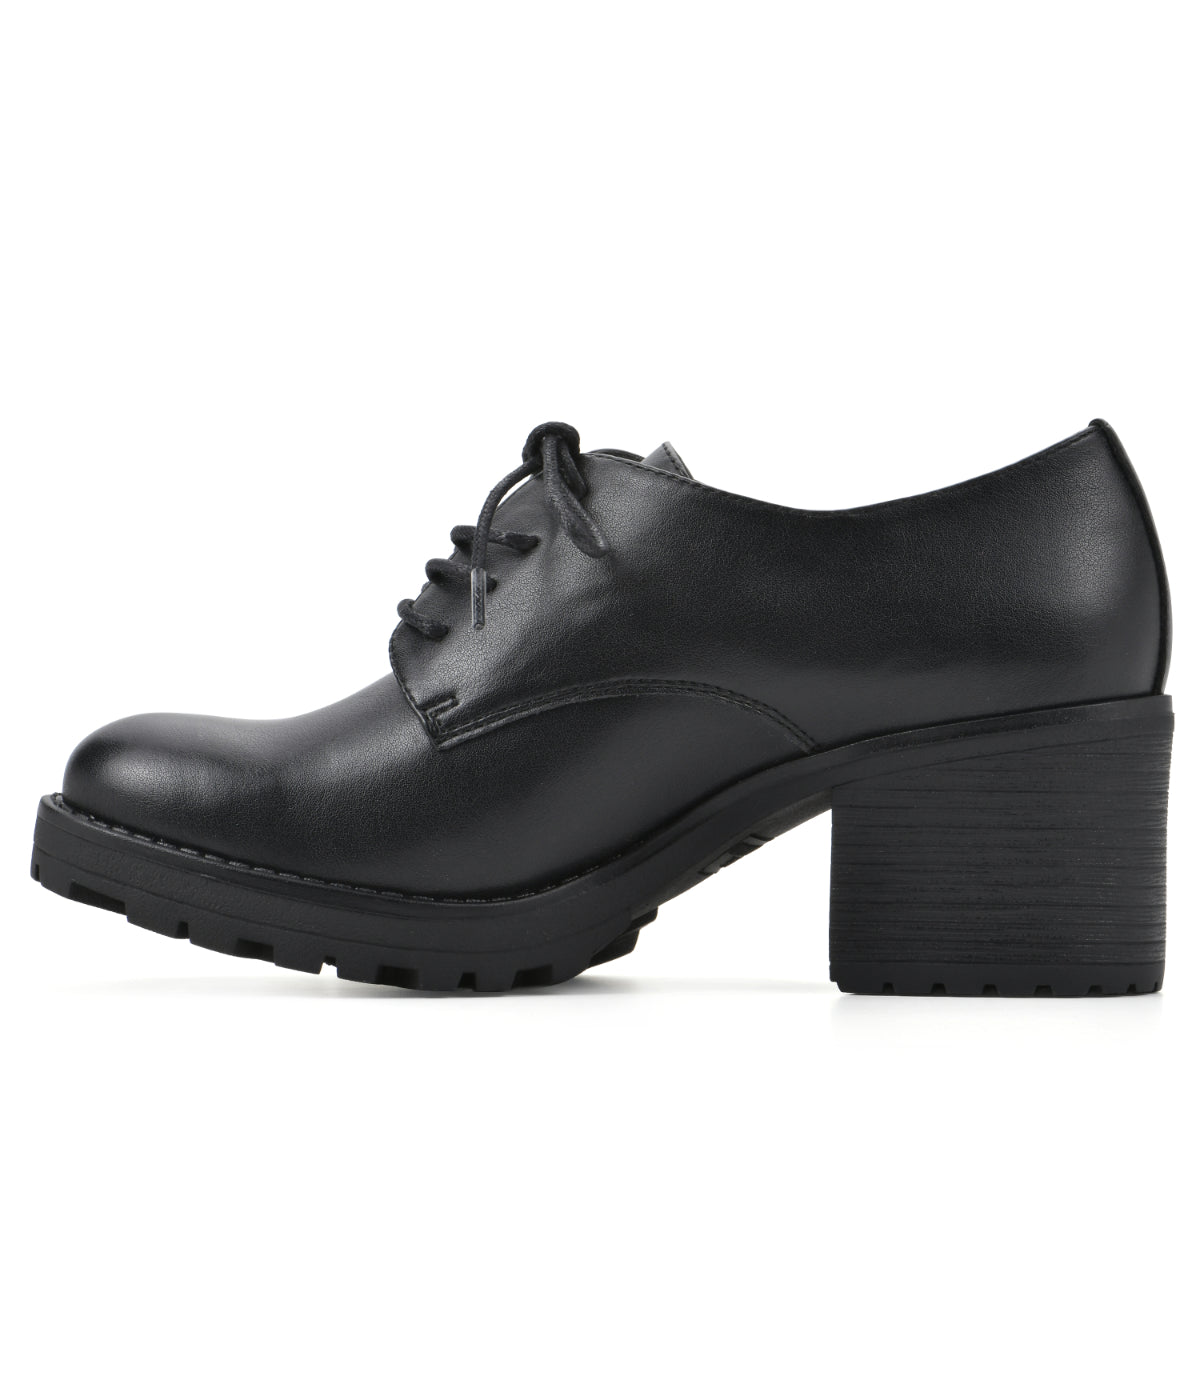 Bourbons Heeled Oxfords Black/Smooth